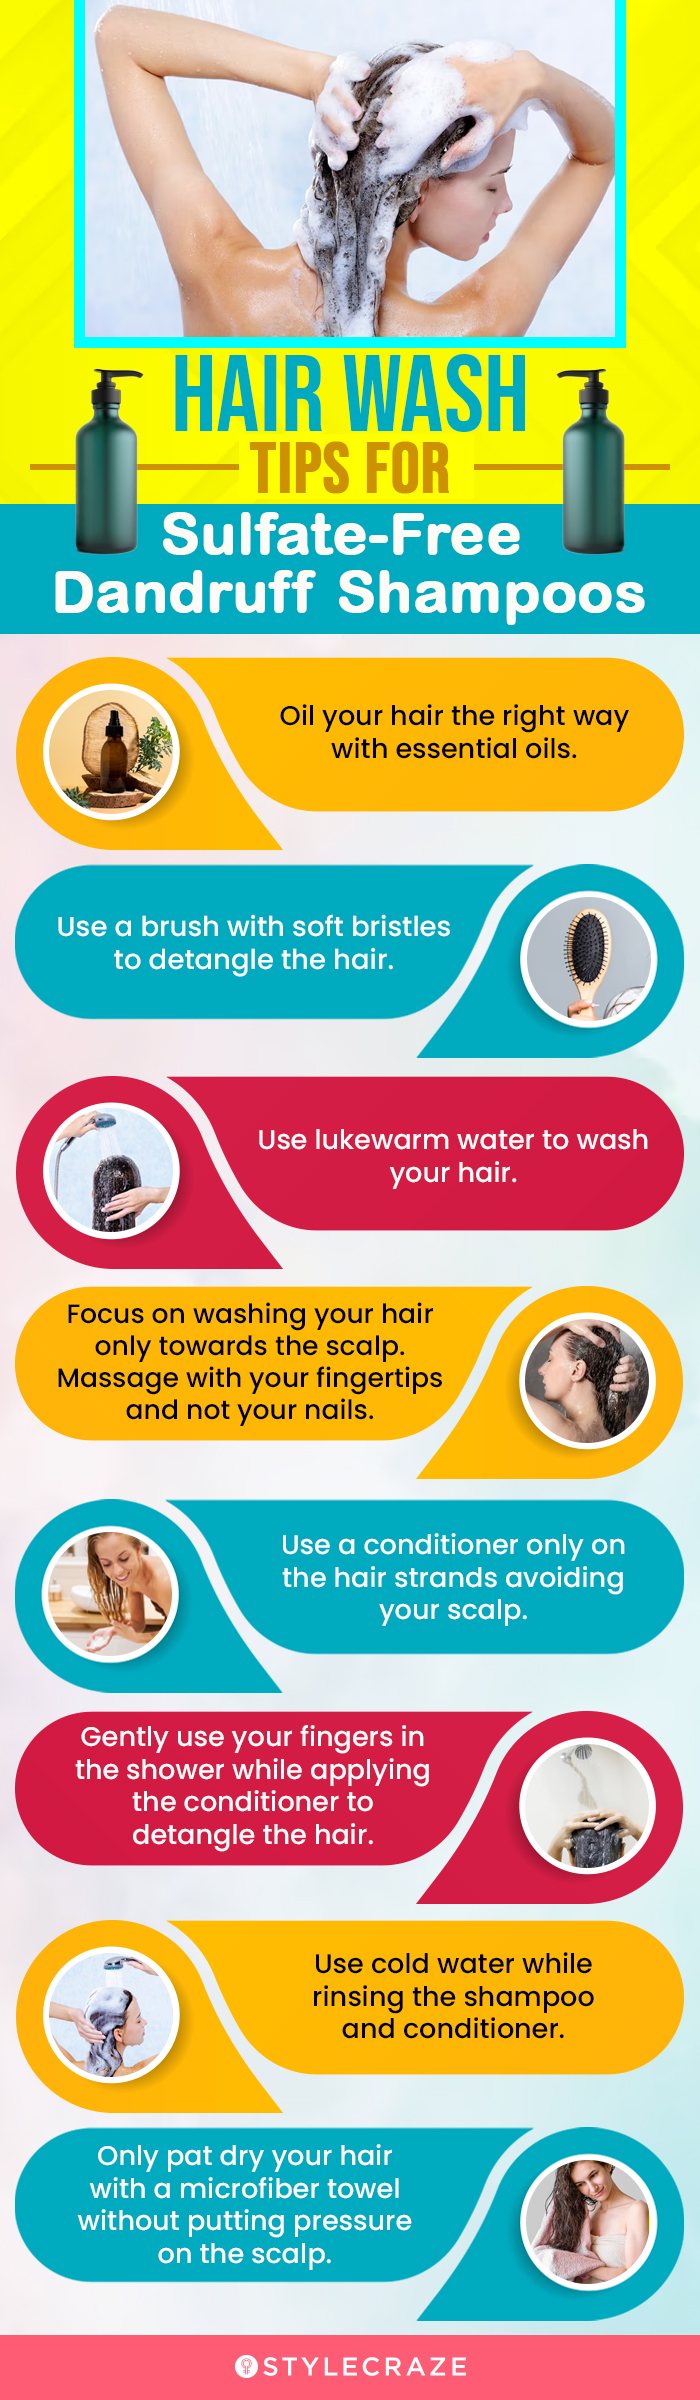 Hair Wash Tips For Sulfate-Free Dandruff Shampoos (infographic)